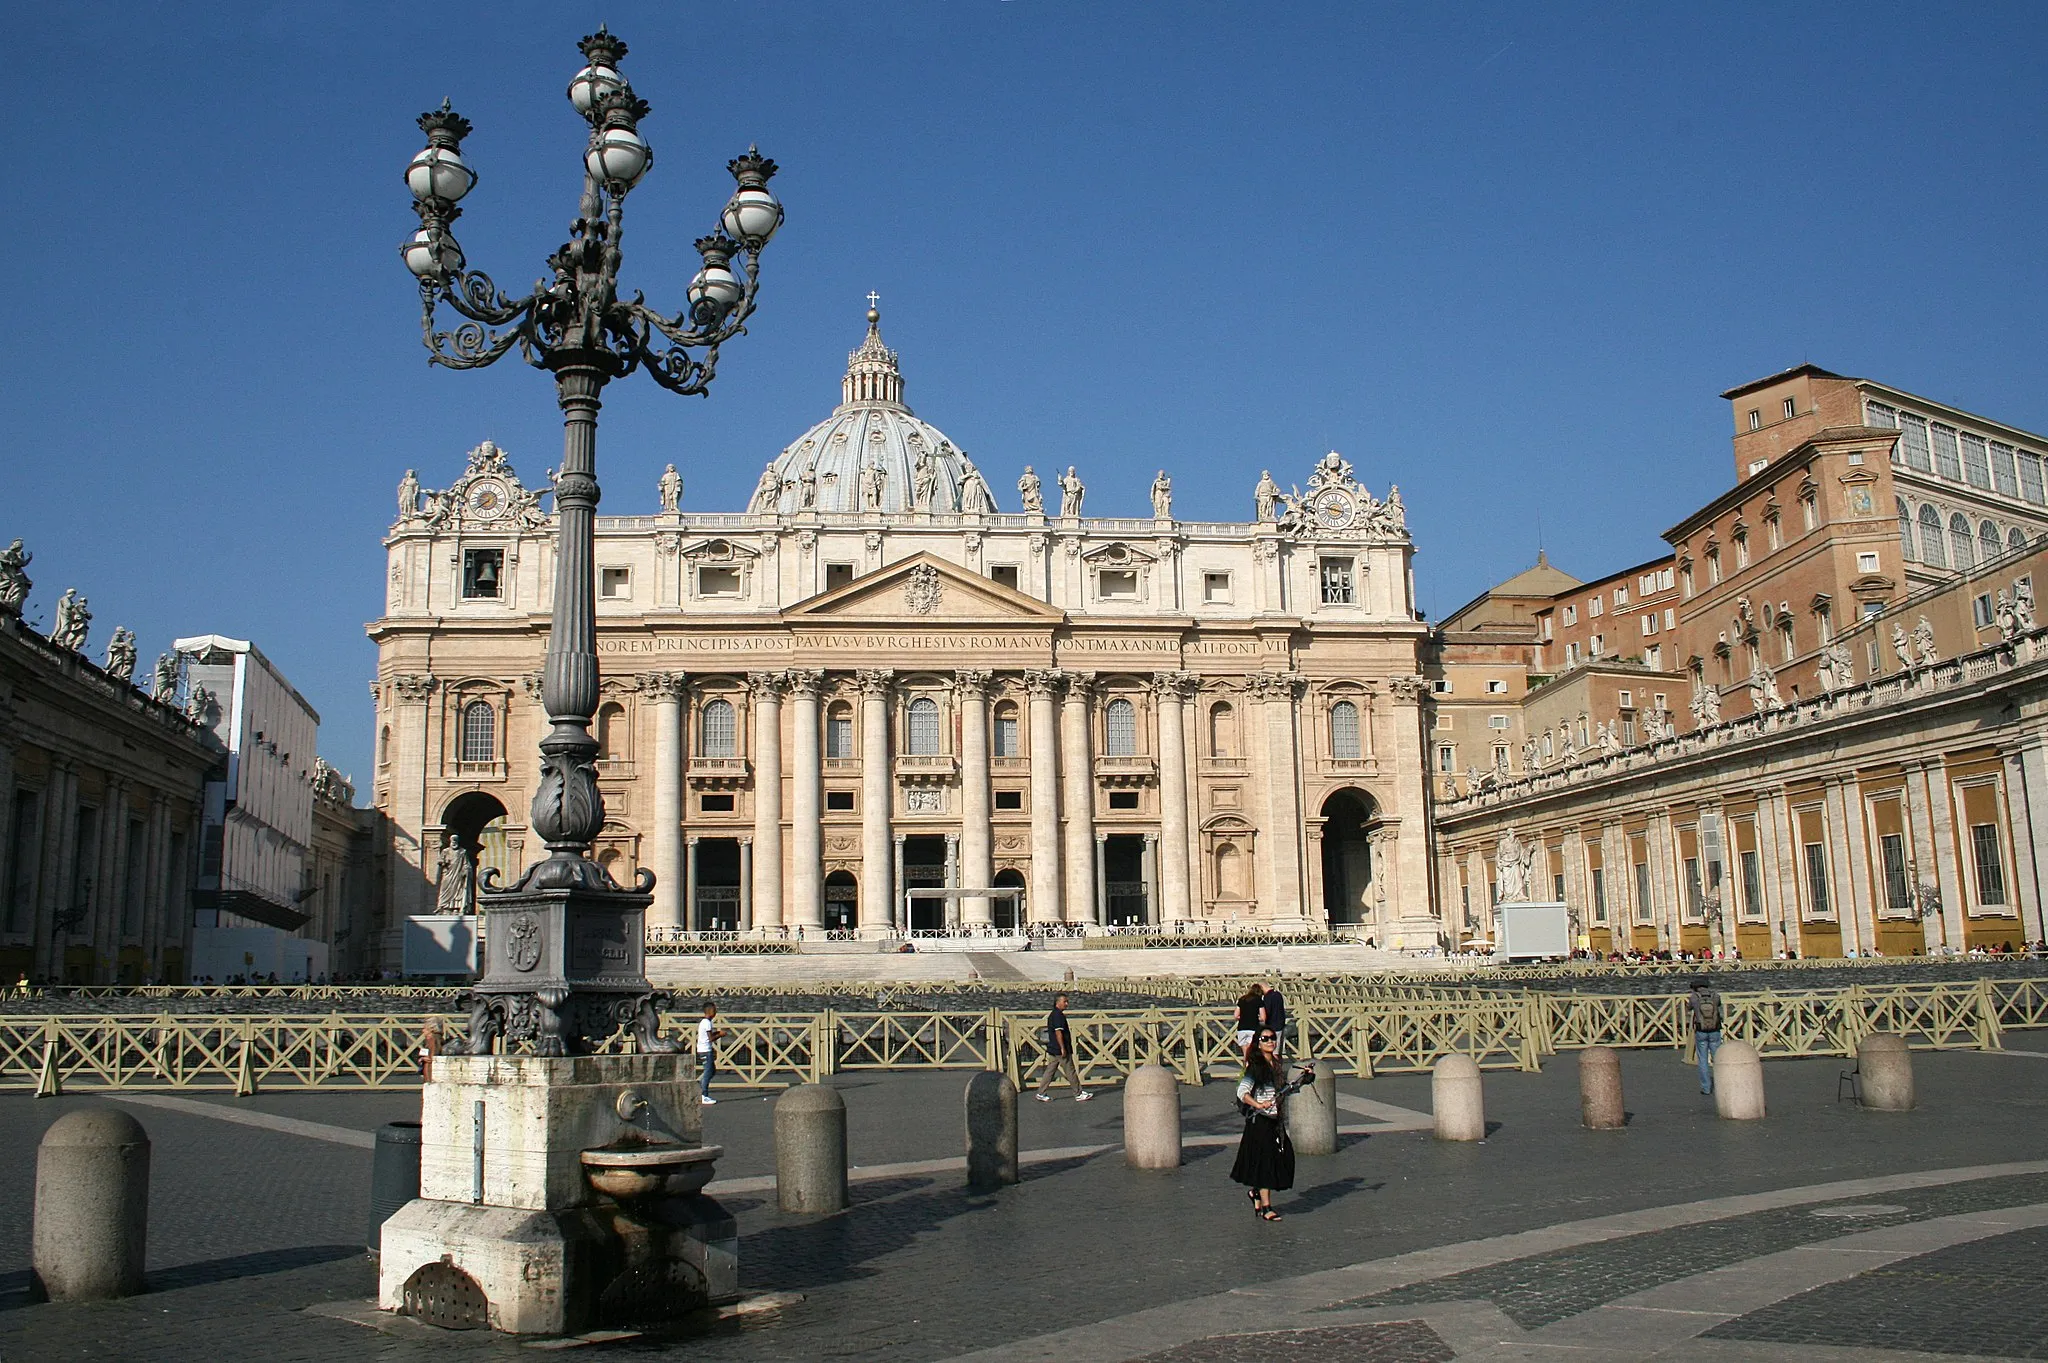 Photo showing: Façade of the St. Peter's Basilica in Vatican City.